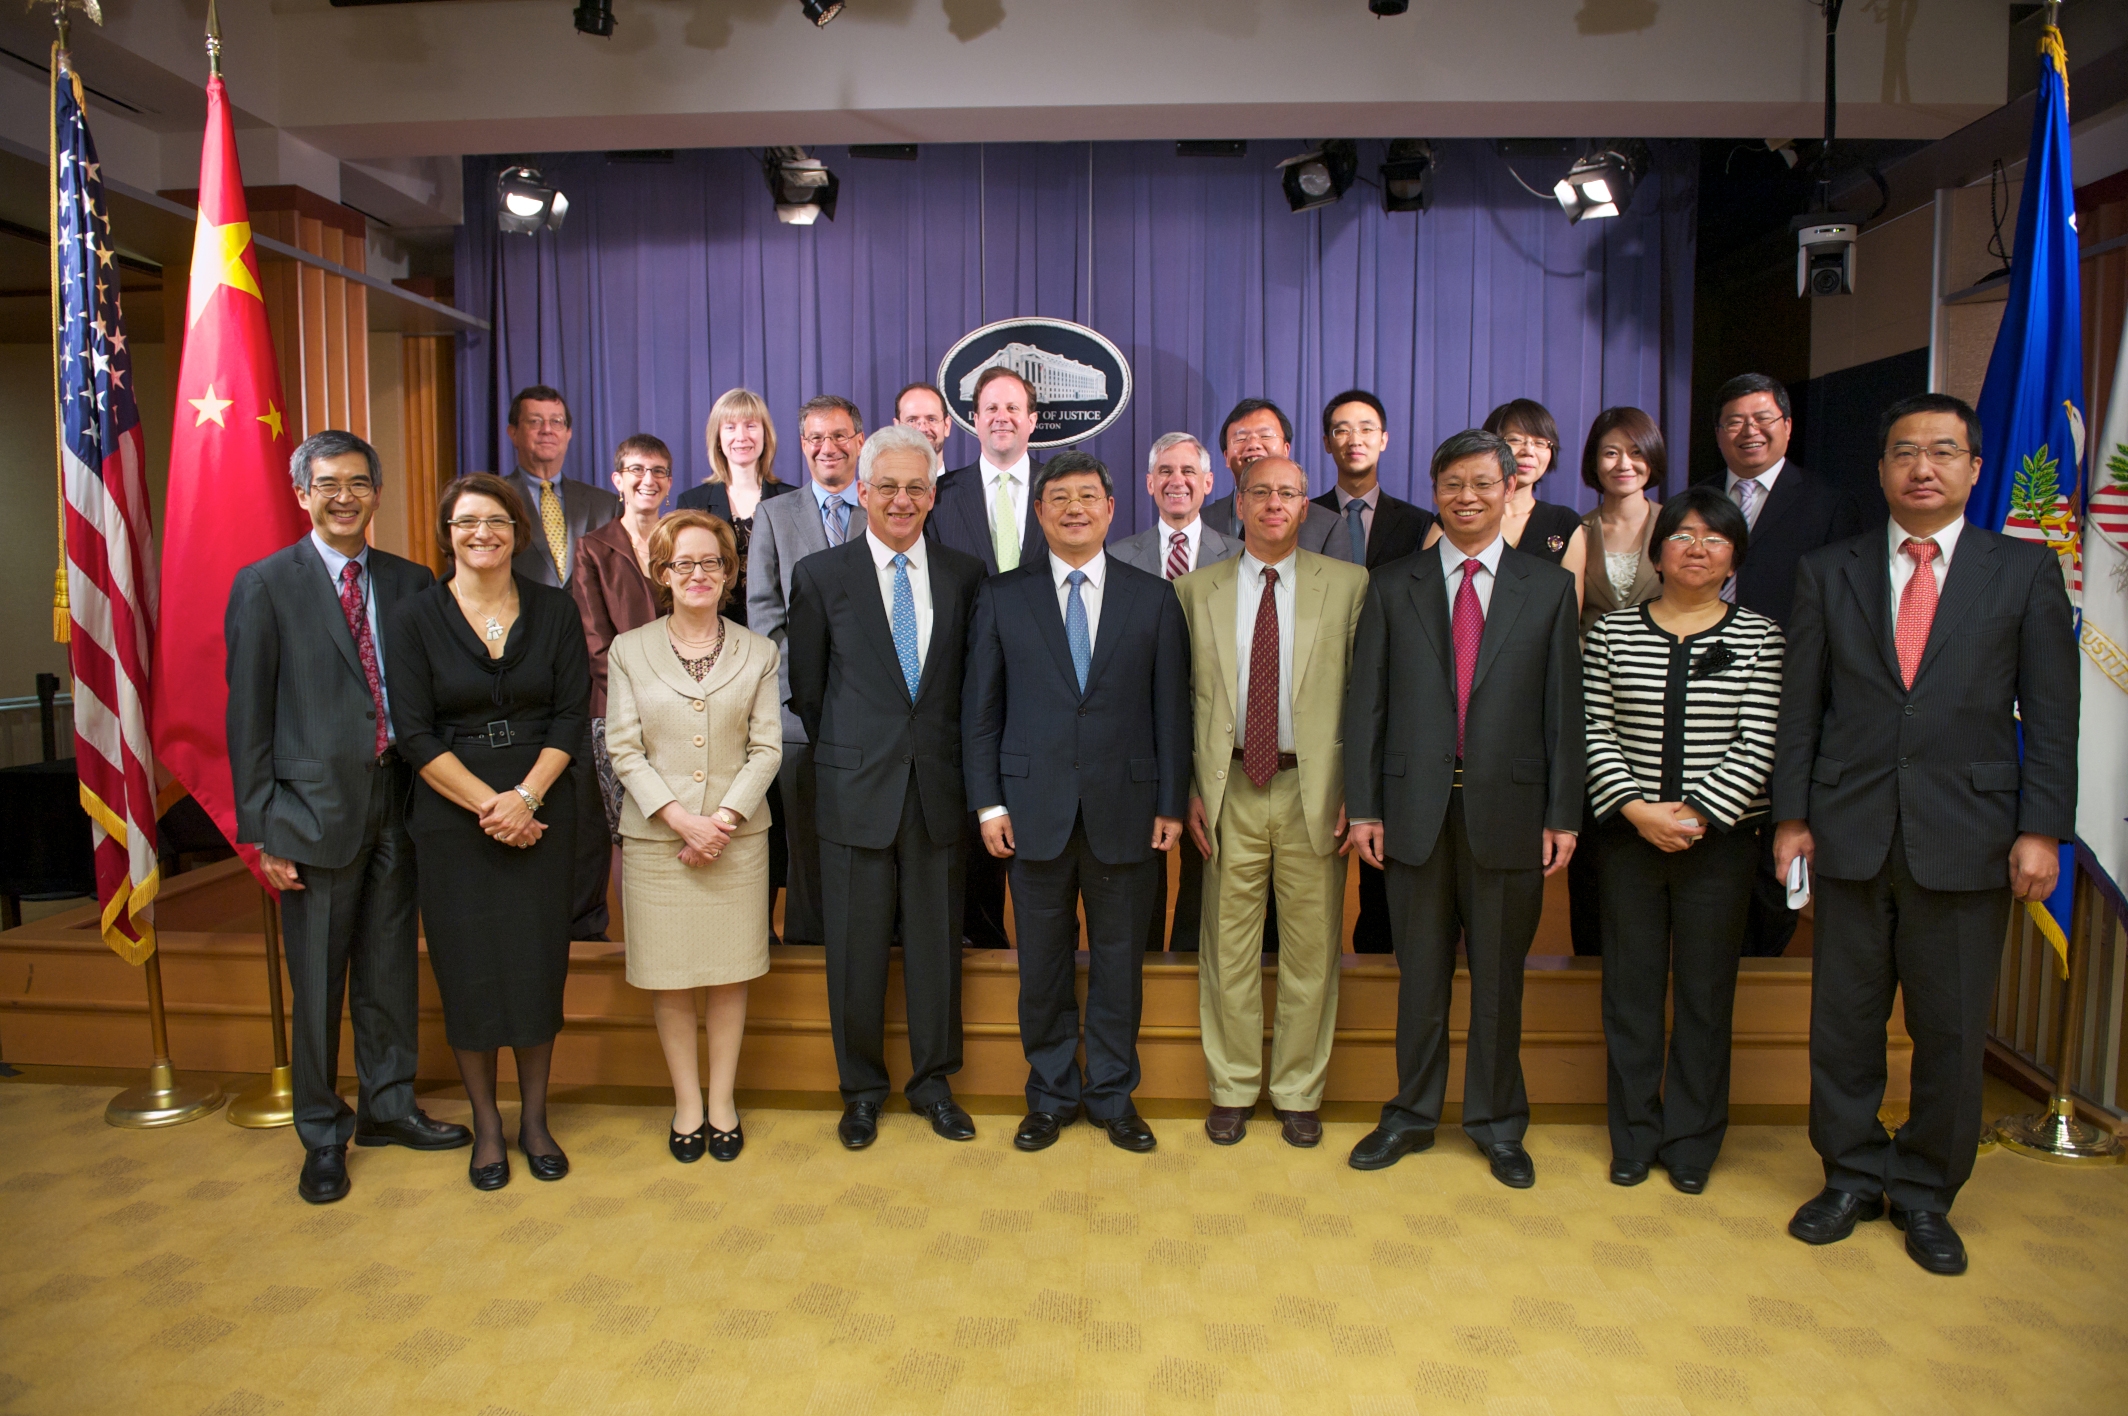 Following the signing of an MOU in July 2011, the first U.S.-China joint dialogue was held in Washington, D.C.